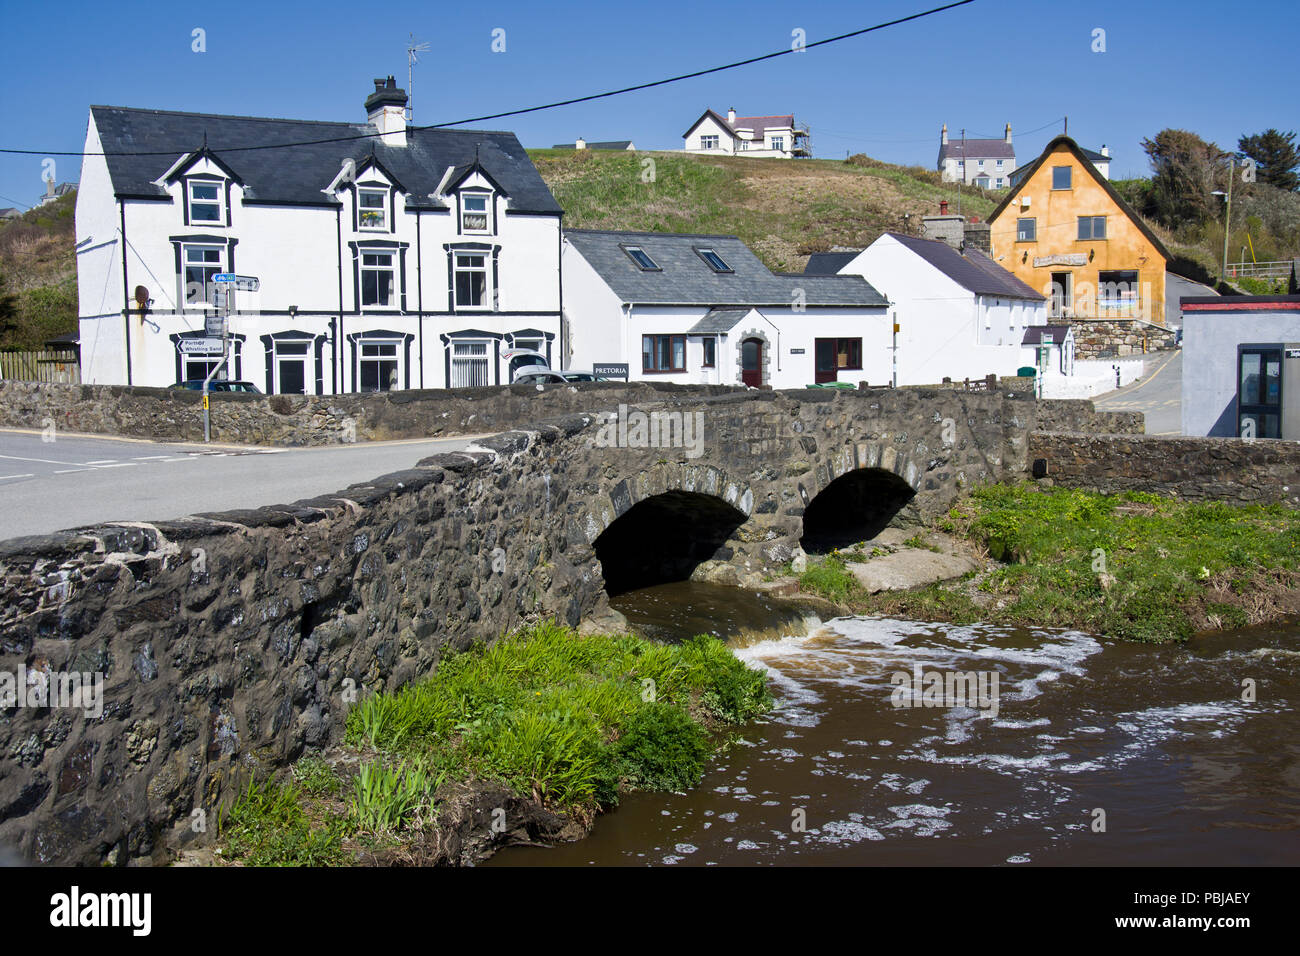 The bridge over the river Cyllyfelin where it joins the river Daron, in Aberdaron, Gwynedd, North Wales. Stock Photo